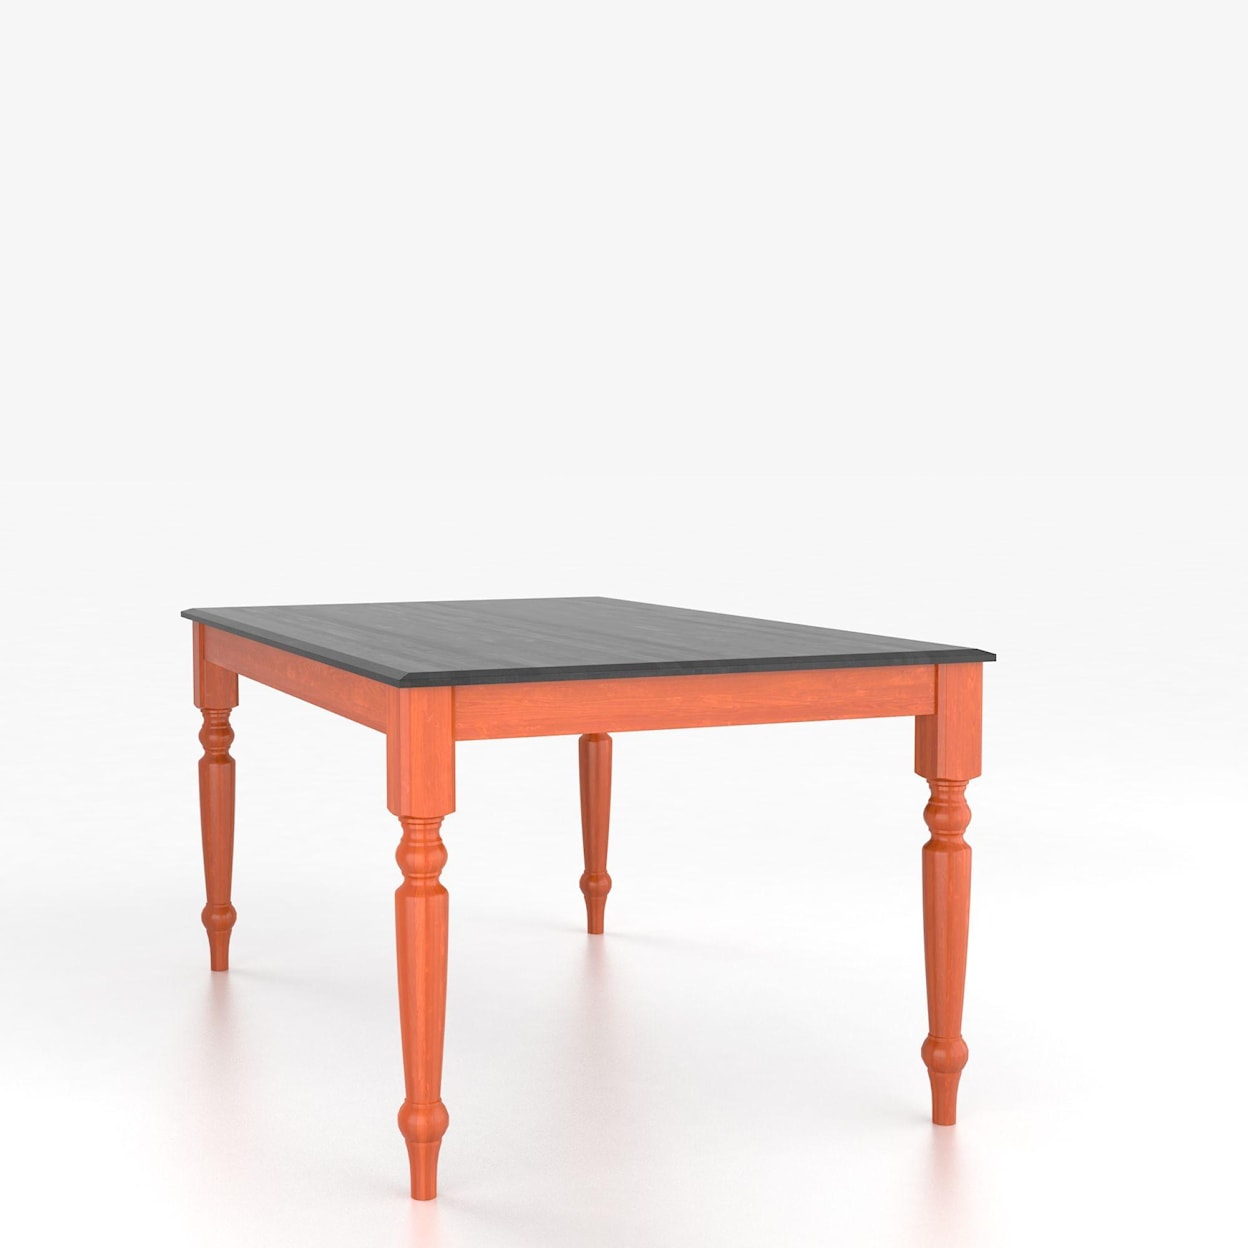 Canadel Custom Dining Tables Customizable Rectangular Table with Legs